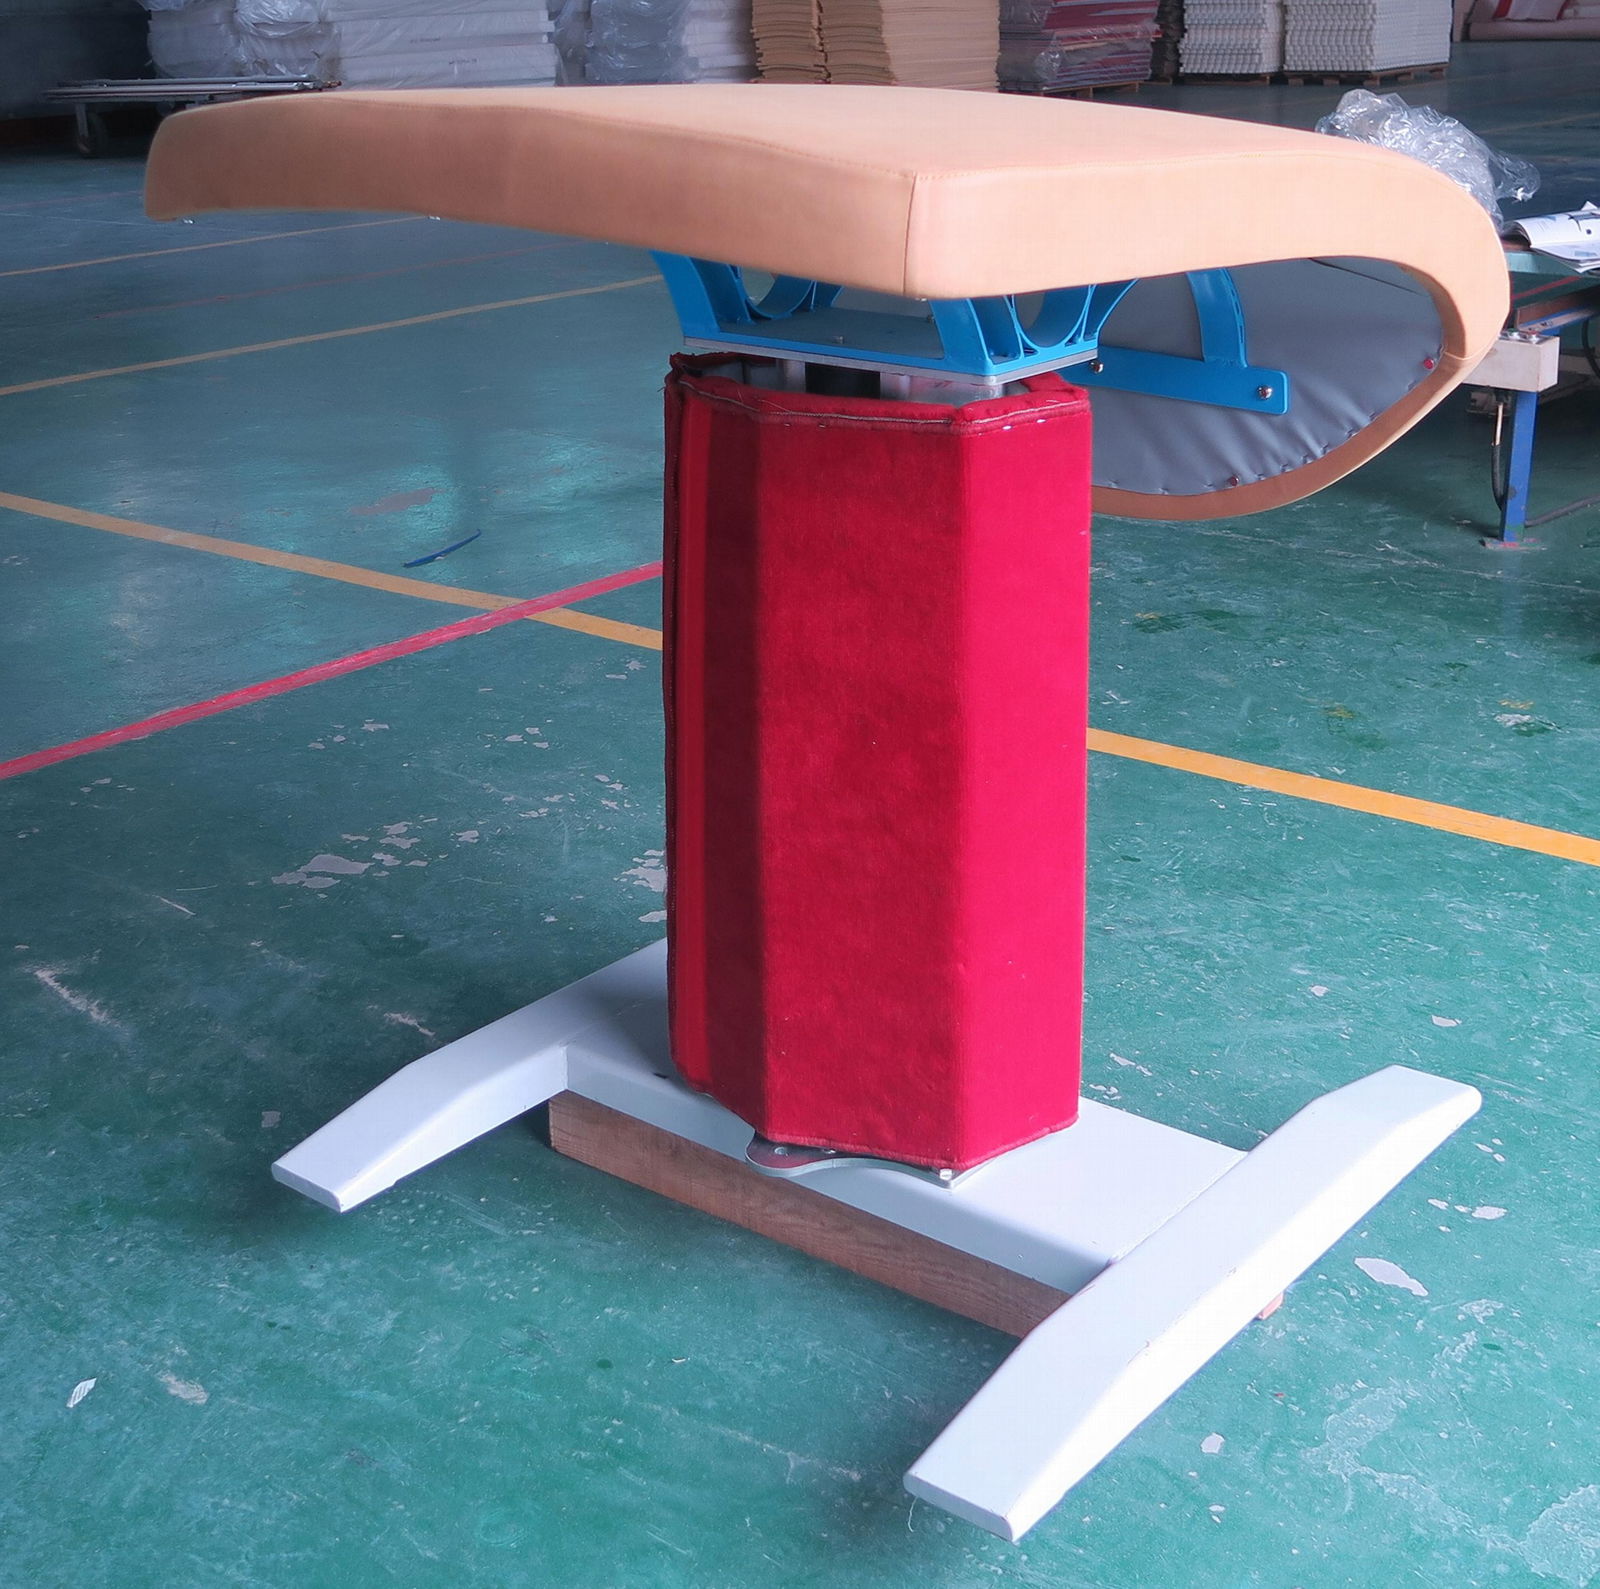 Factory Direct Supply Cheap Gymnastic Vaulting Horse, Vaulting Table 3